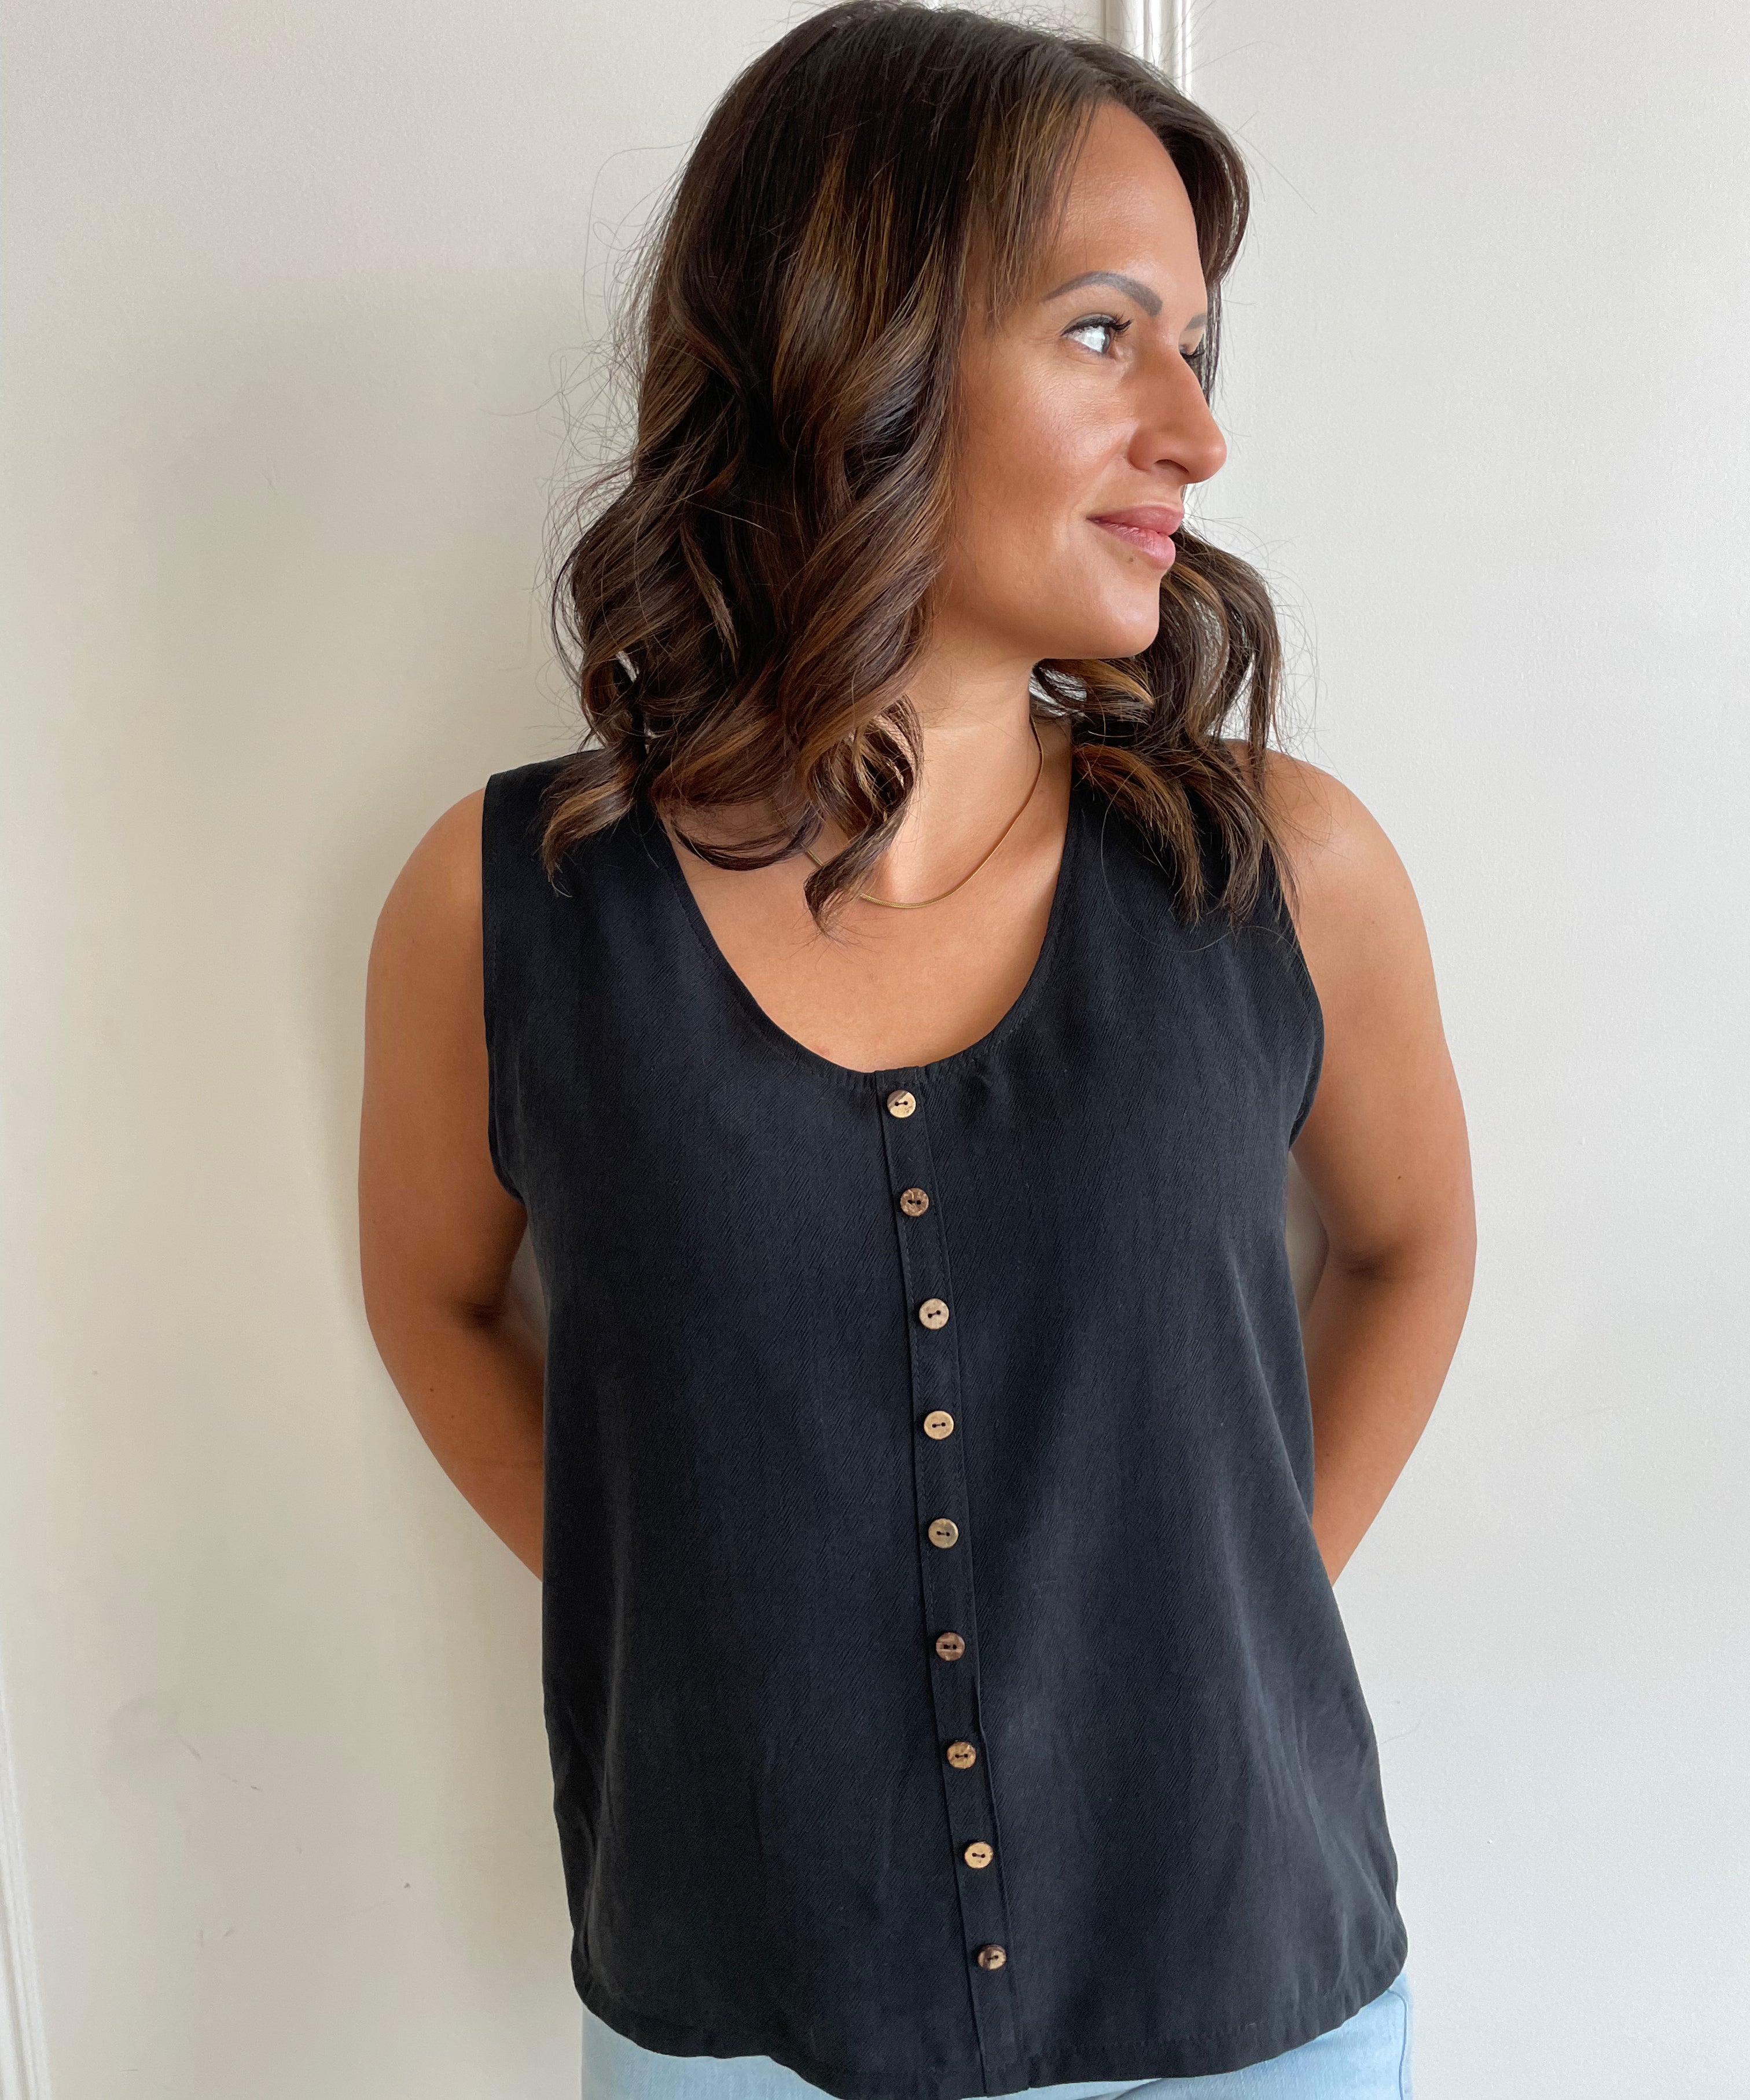 Black loose fitting tank with brown buttons